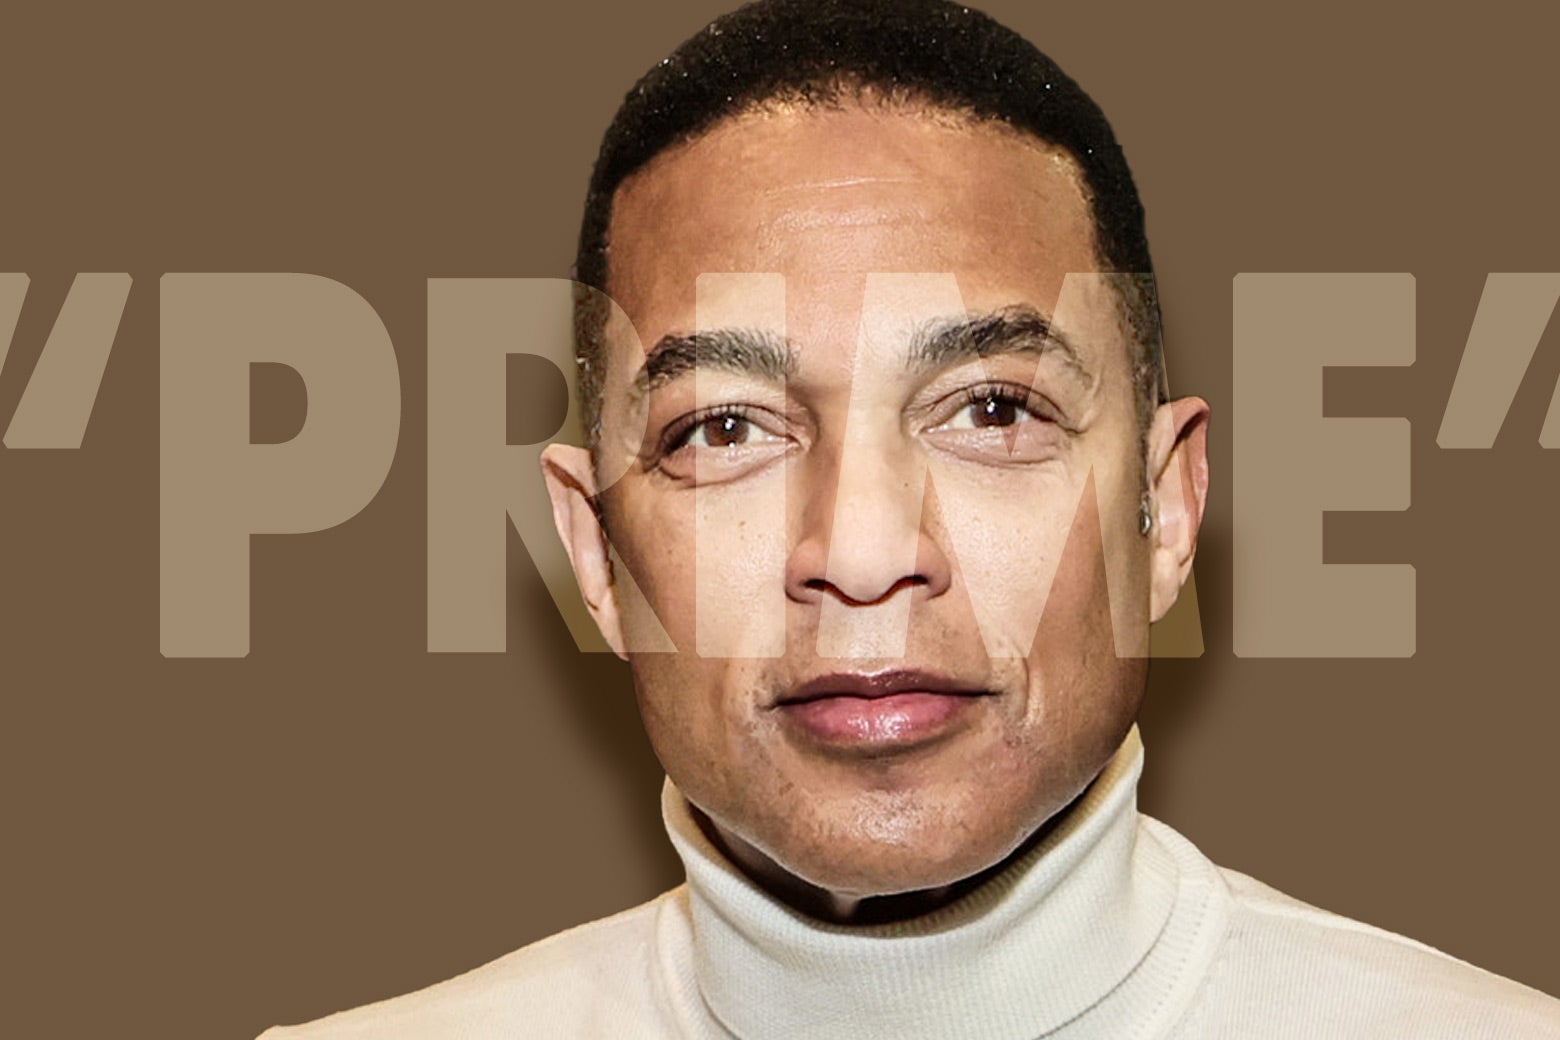 Don Lemon is seen with the word "prime" floating in front of his face. 